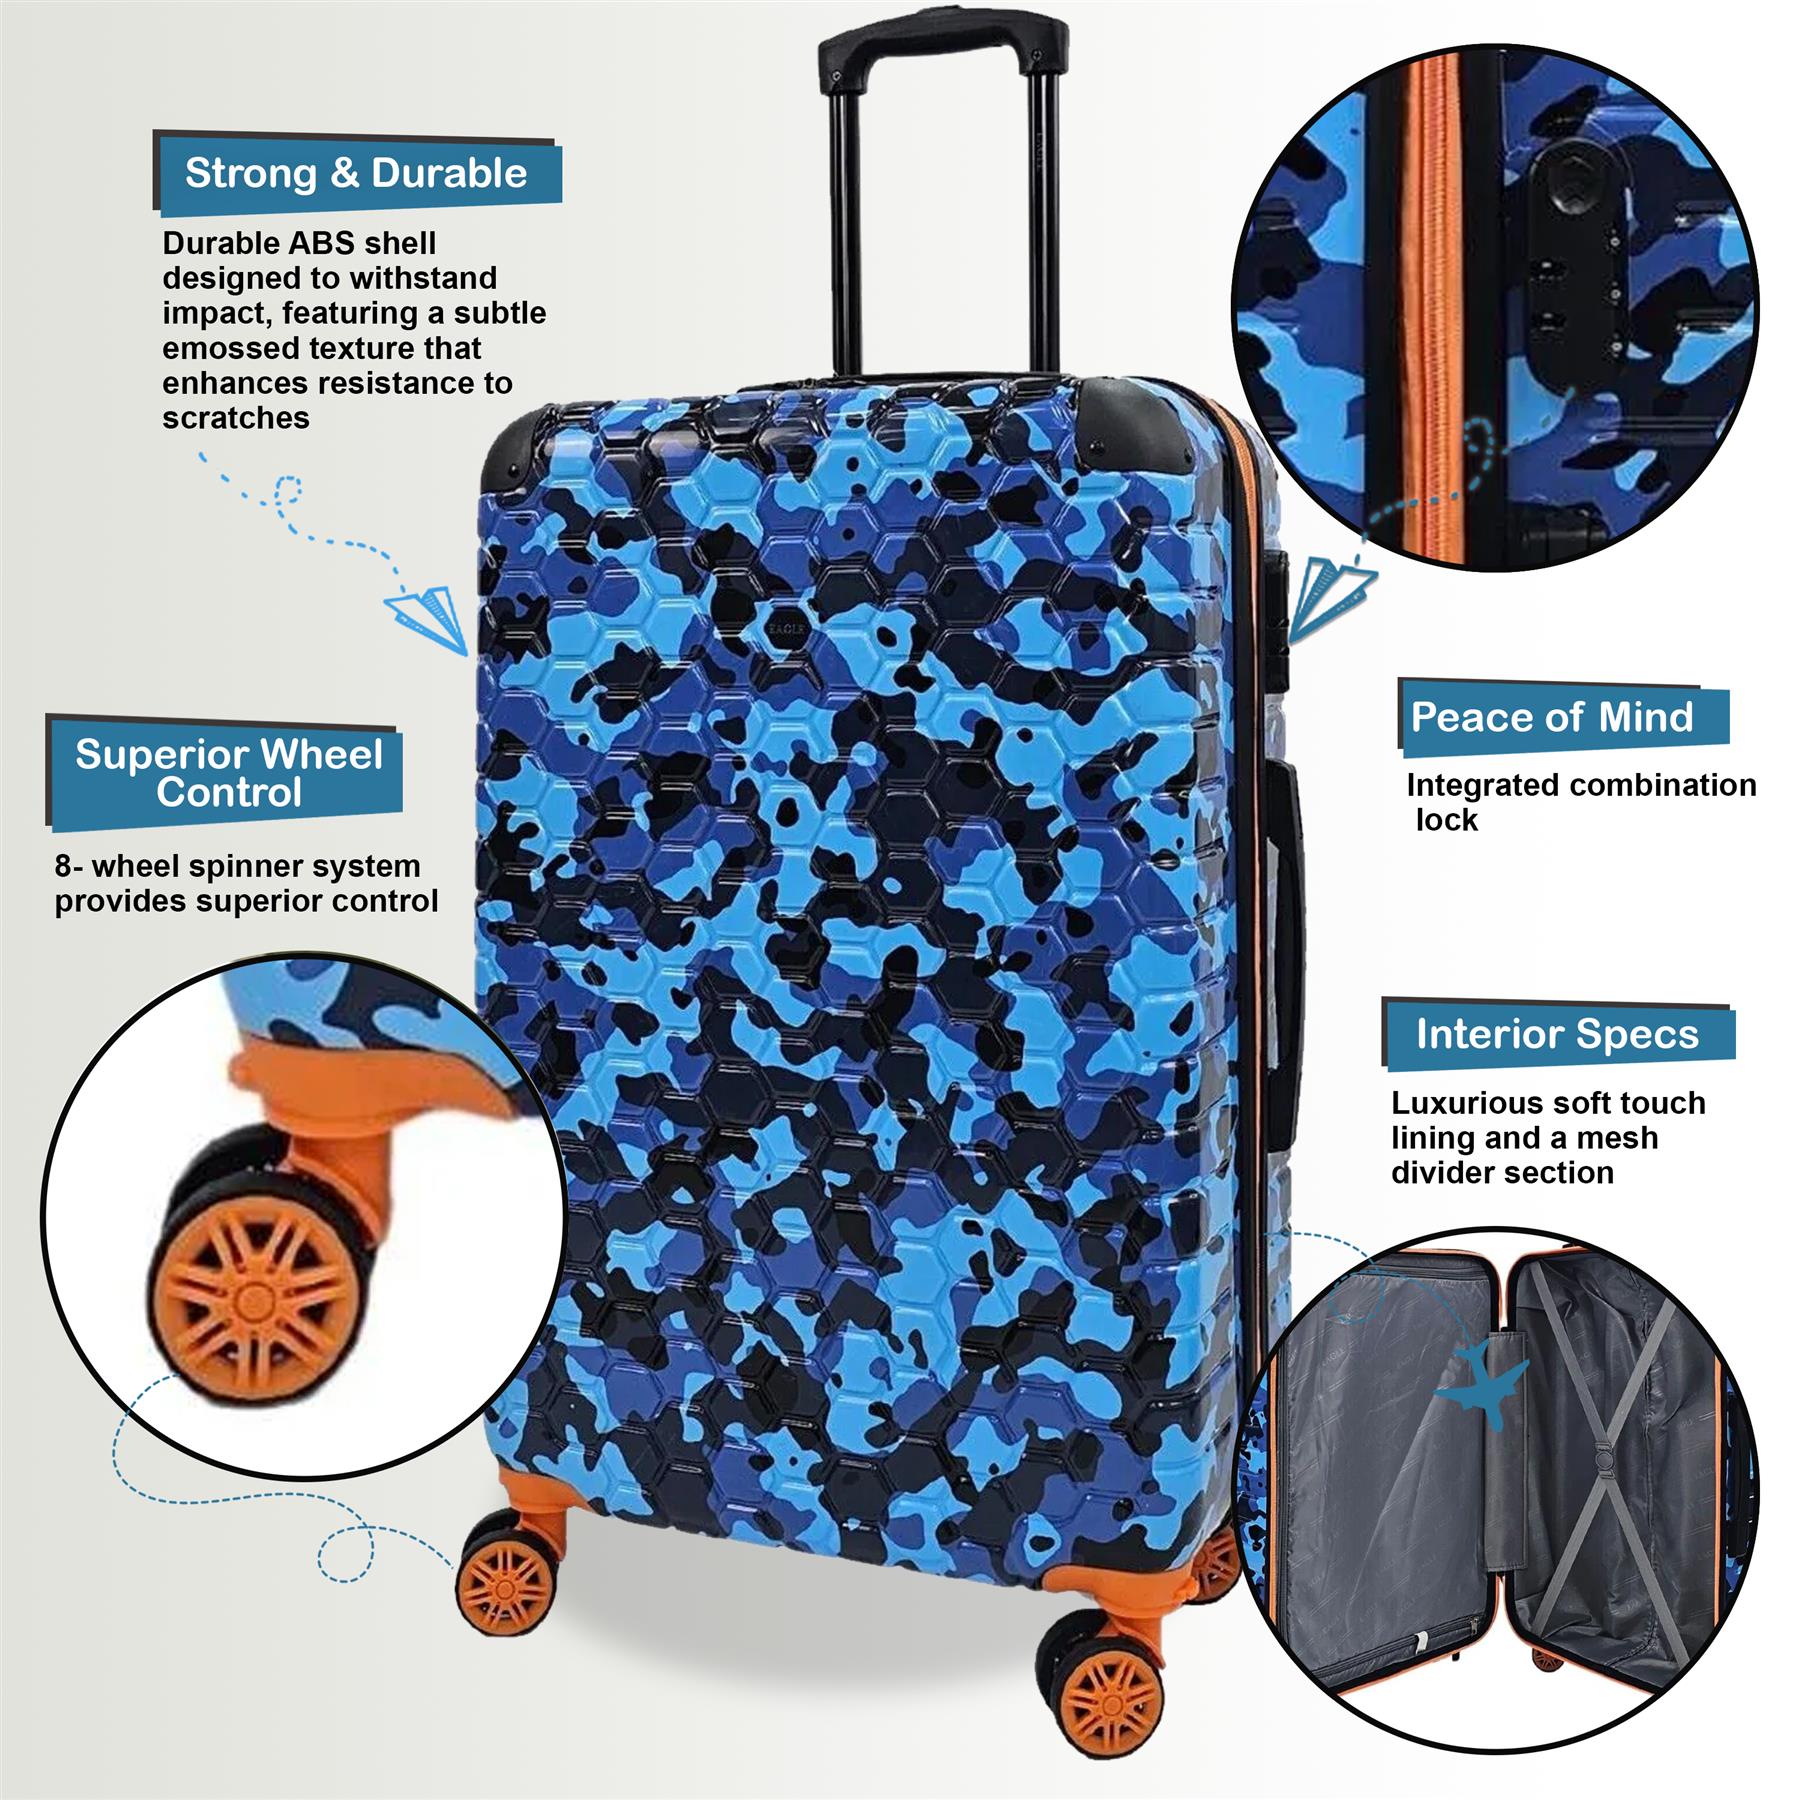 Brantley Set of 4 Hard Shell Suitcase in Blue